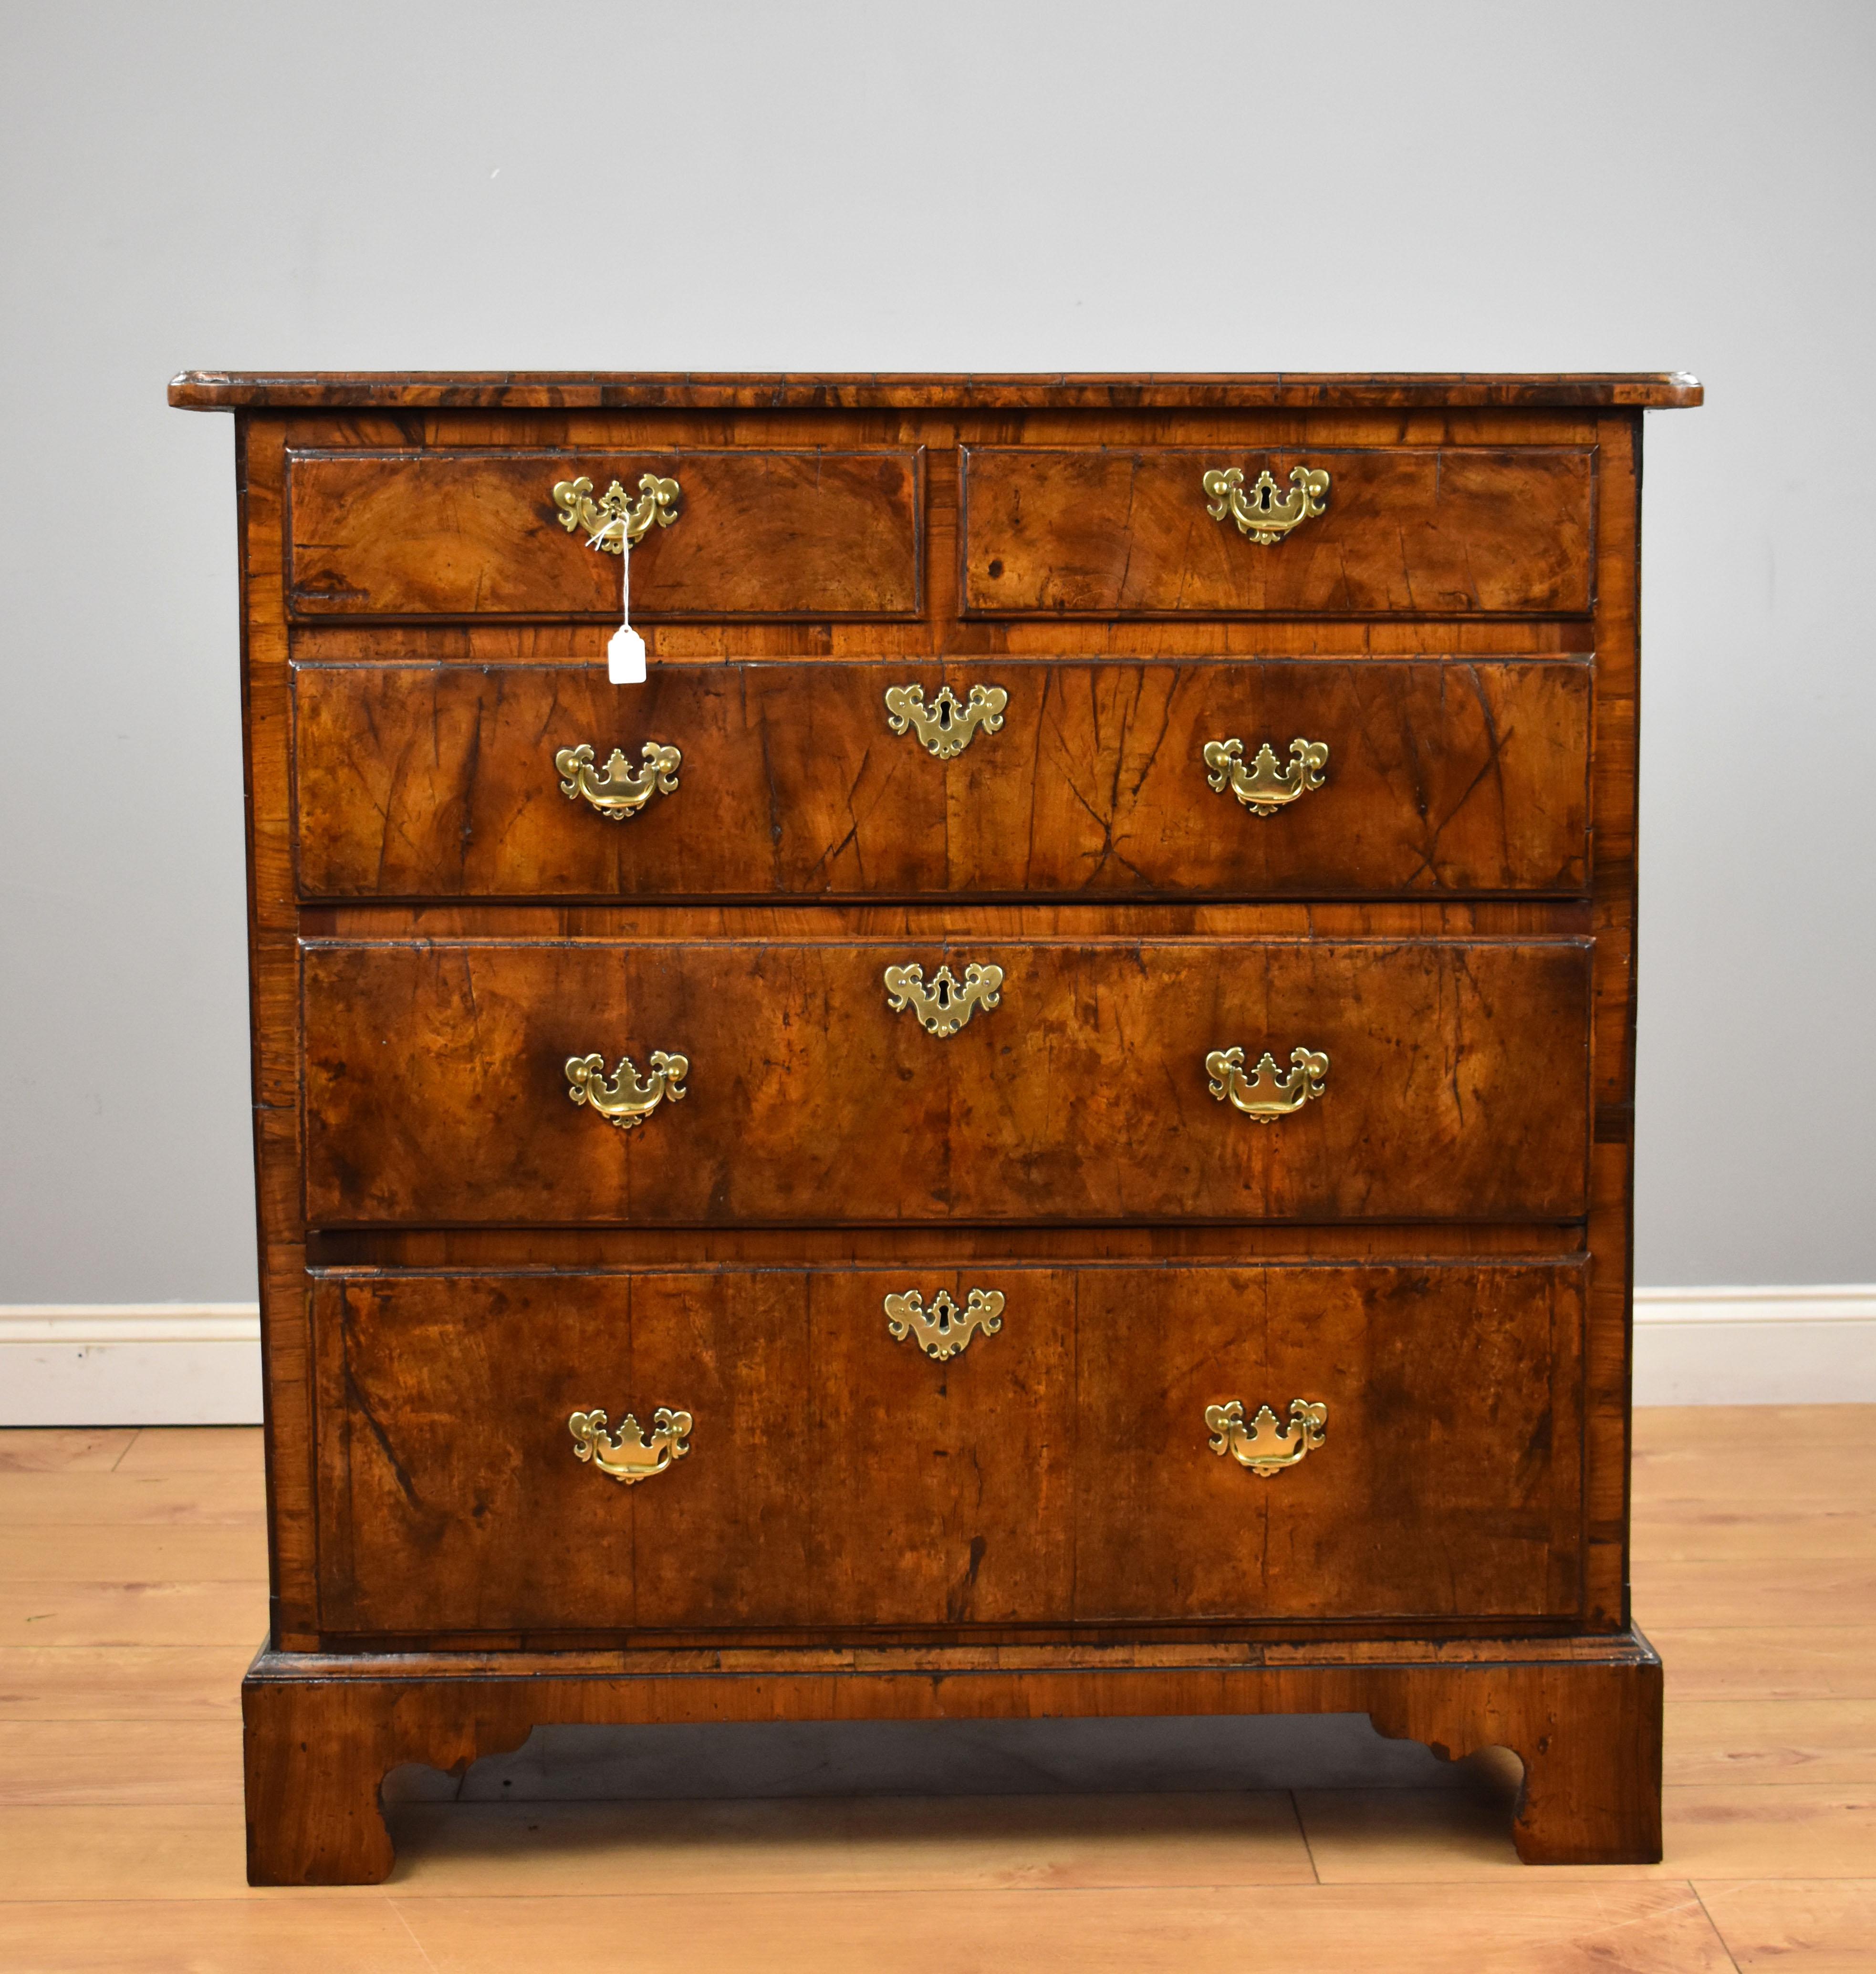 For sale is a good quality George II walnut chest of drawers, having an arrangement of five graduated drawers, two short over three long, raised on bracket feet. The chest is in good functional condition, showing wear commensurate with age and